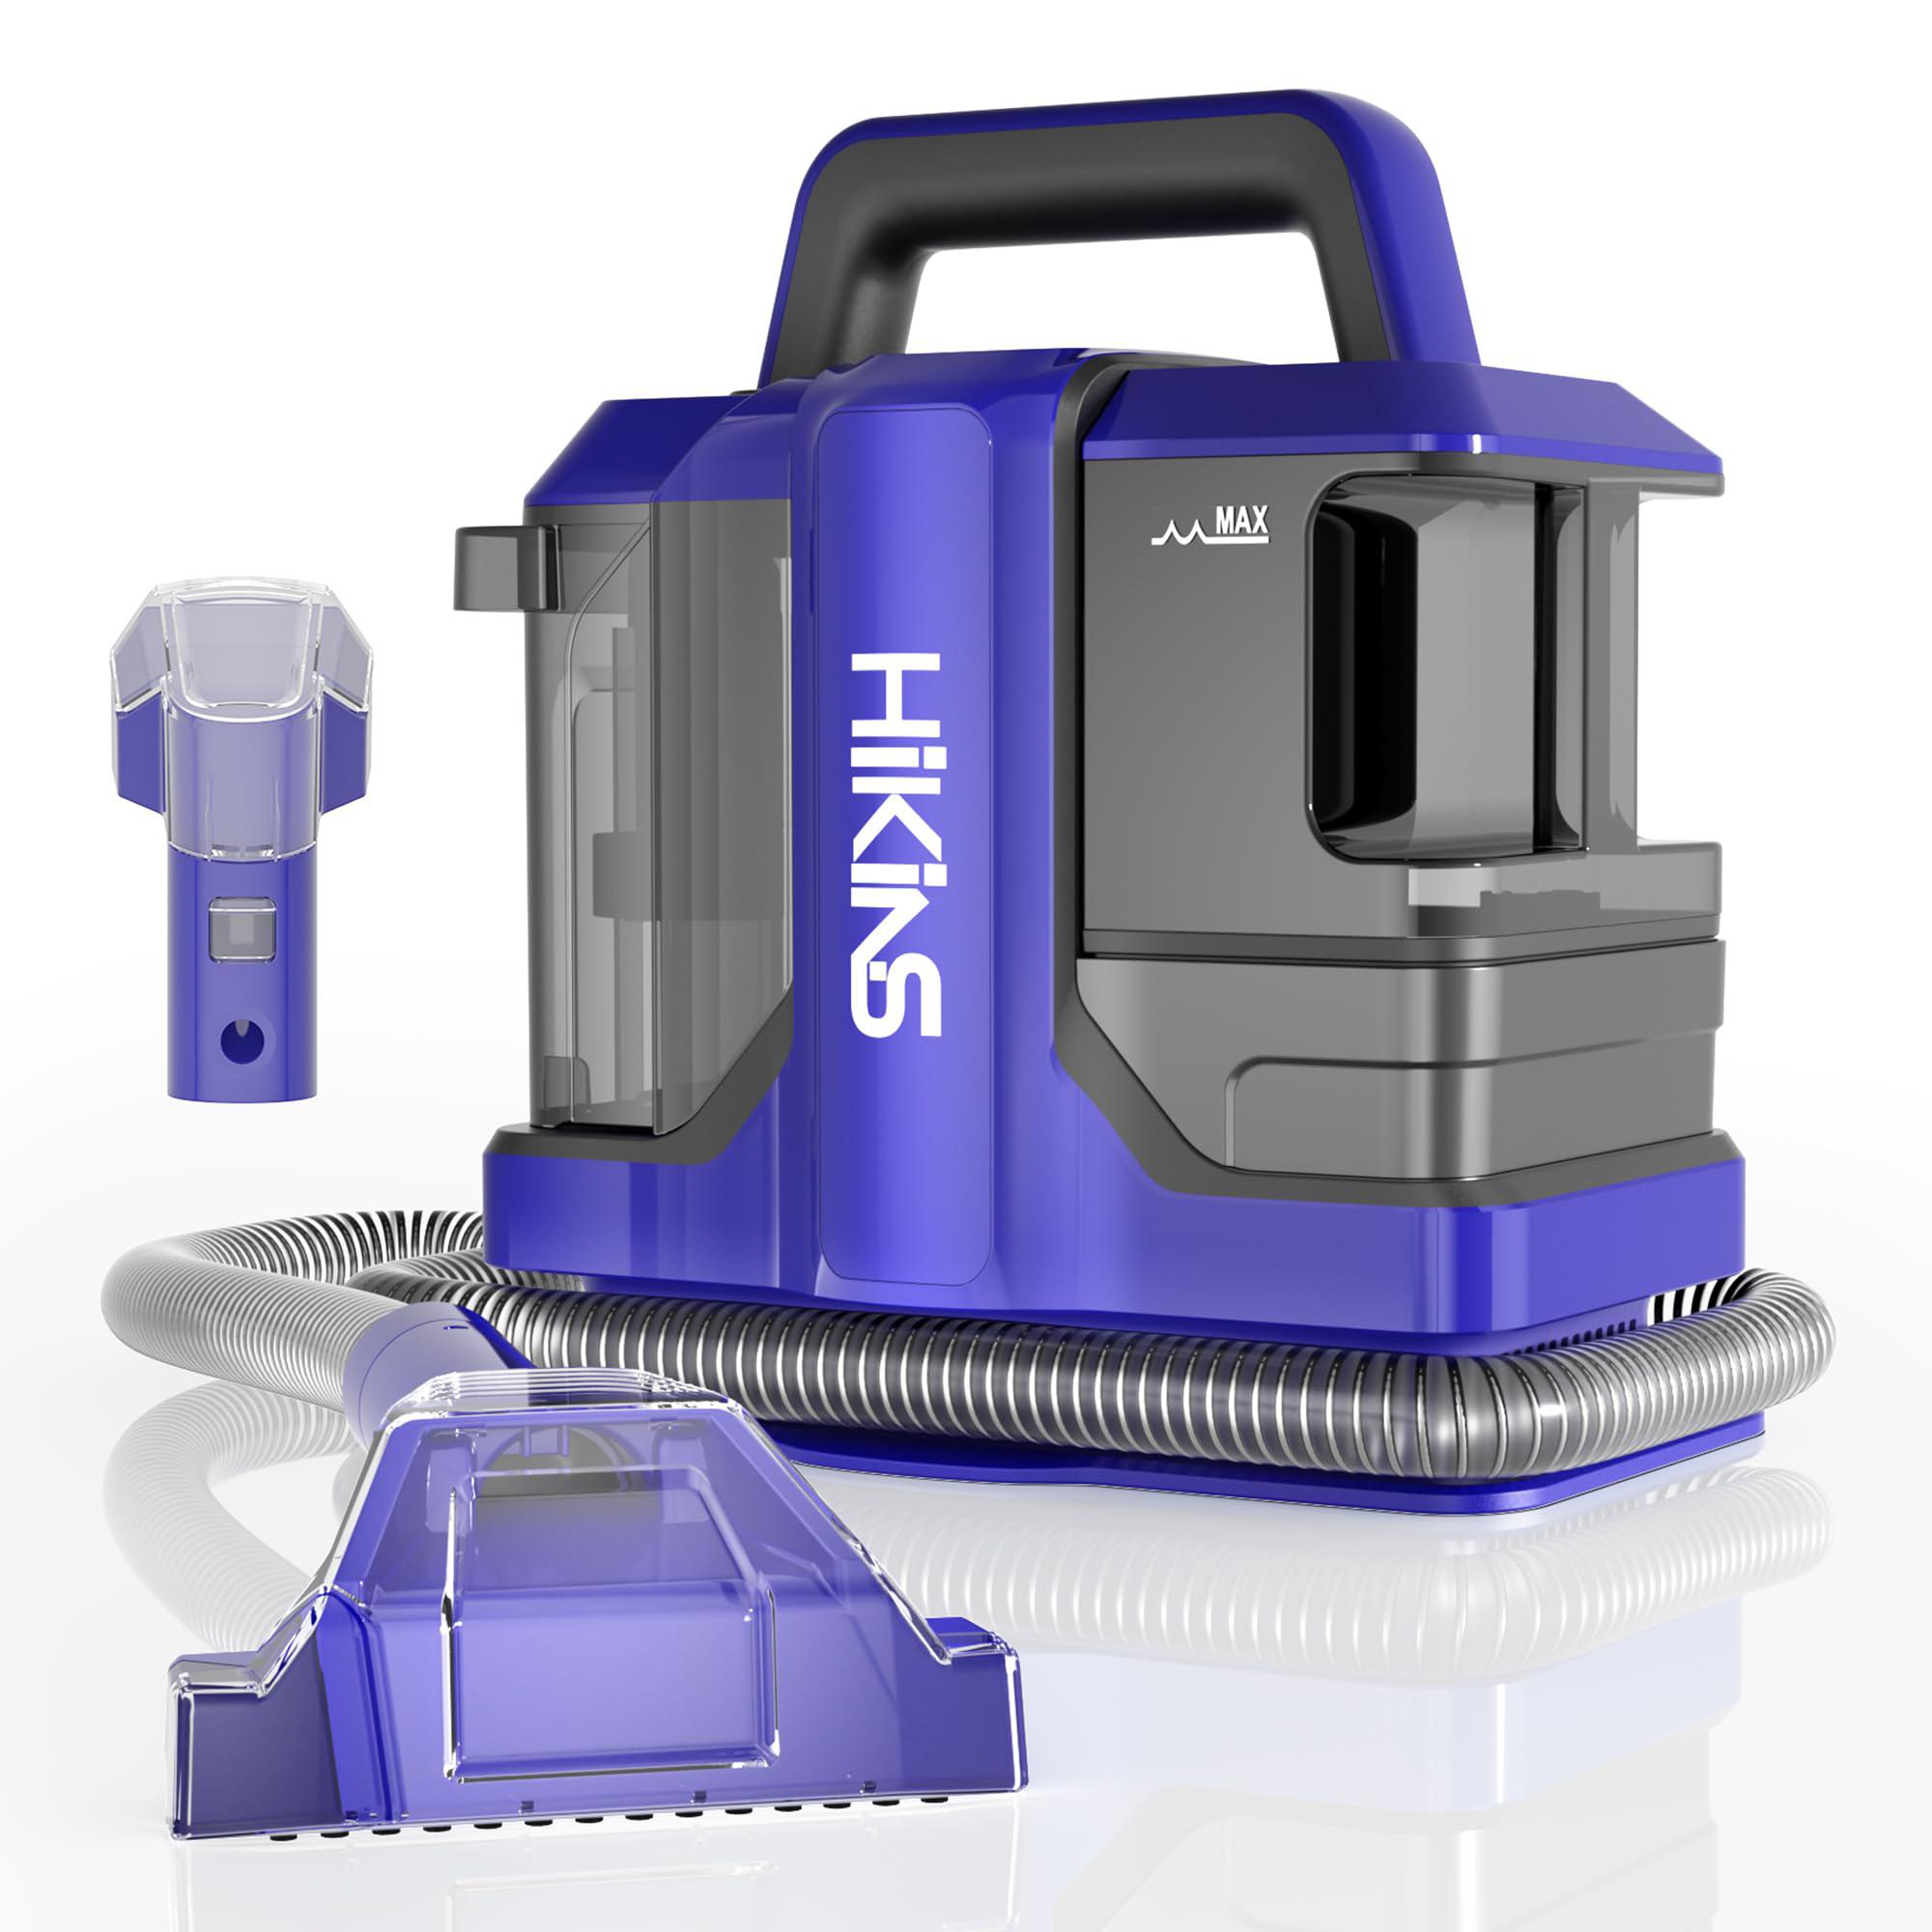 HiKiNS hikins portable carpet cleaner machine - upholstery cleaner